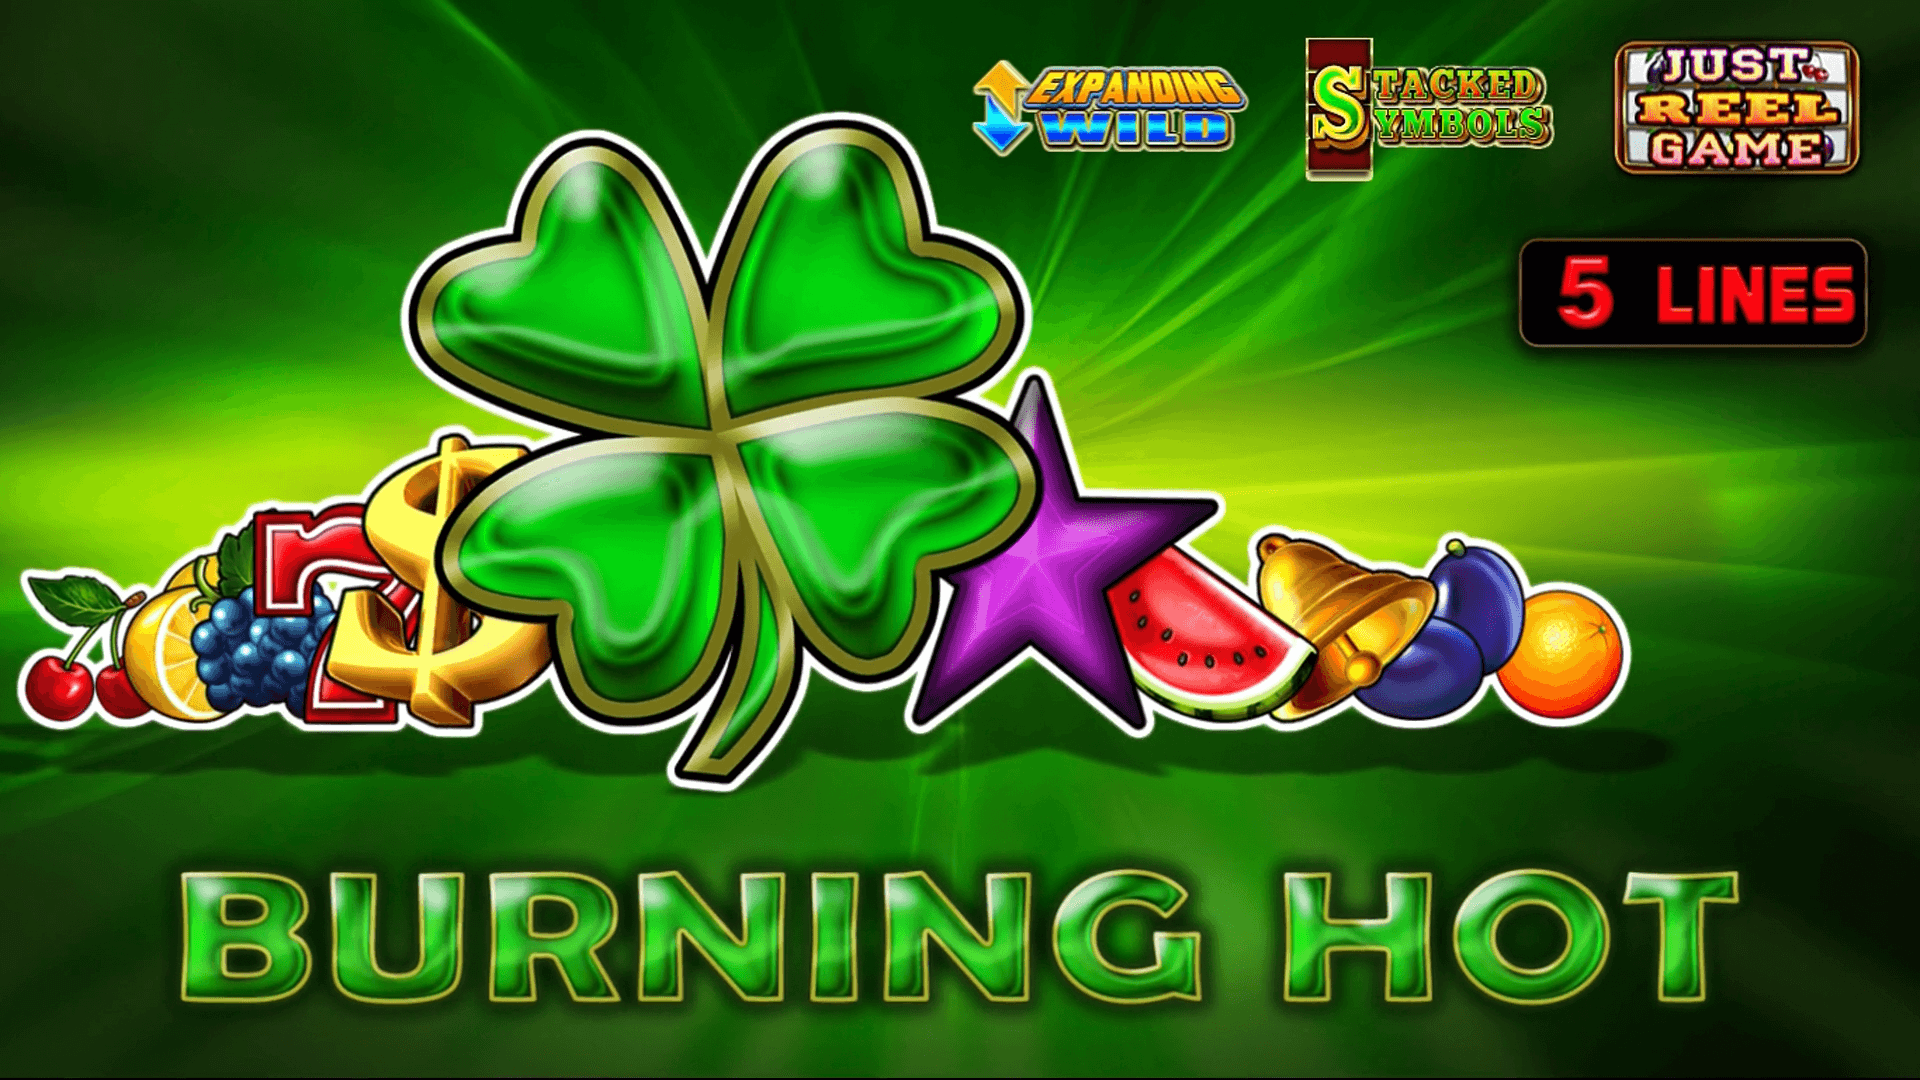 egt games collection series gold collection hd burning hot